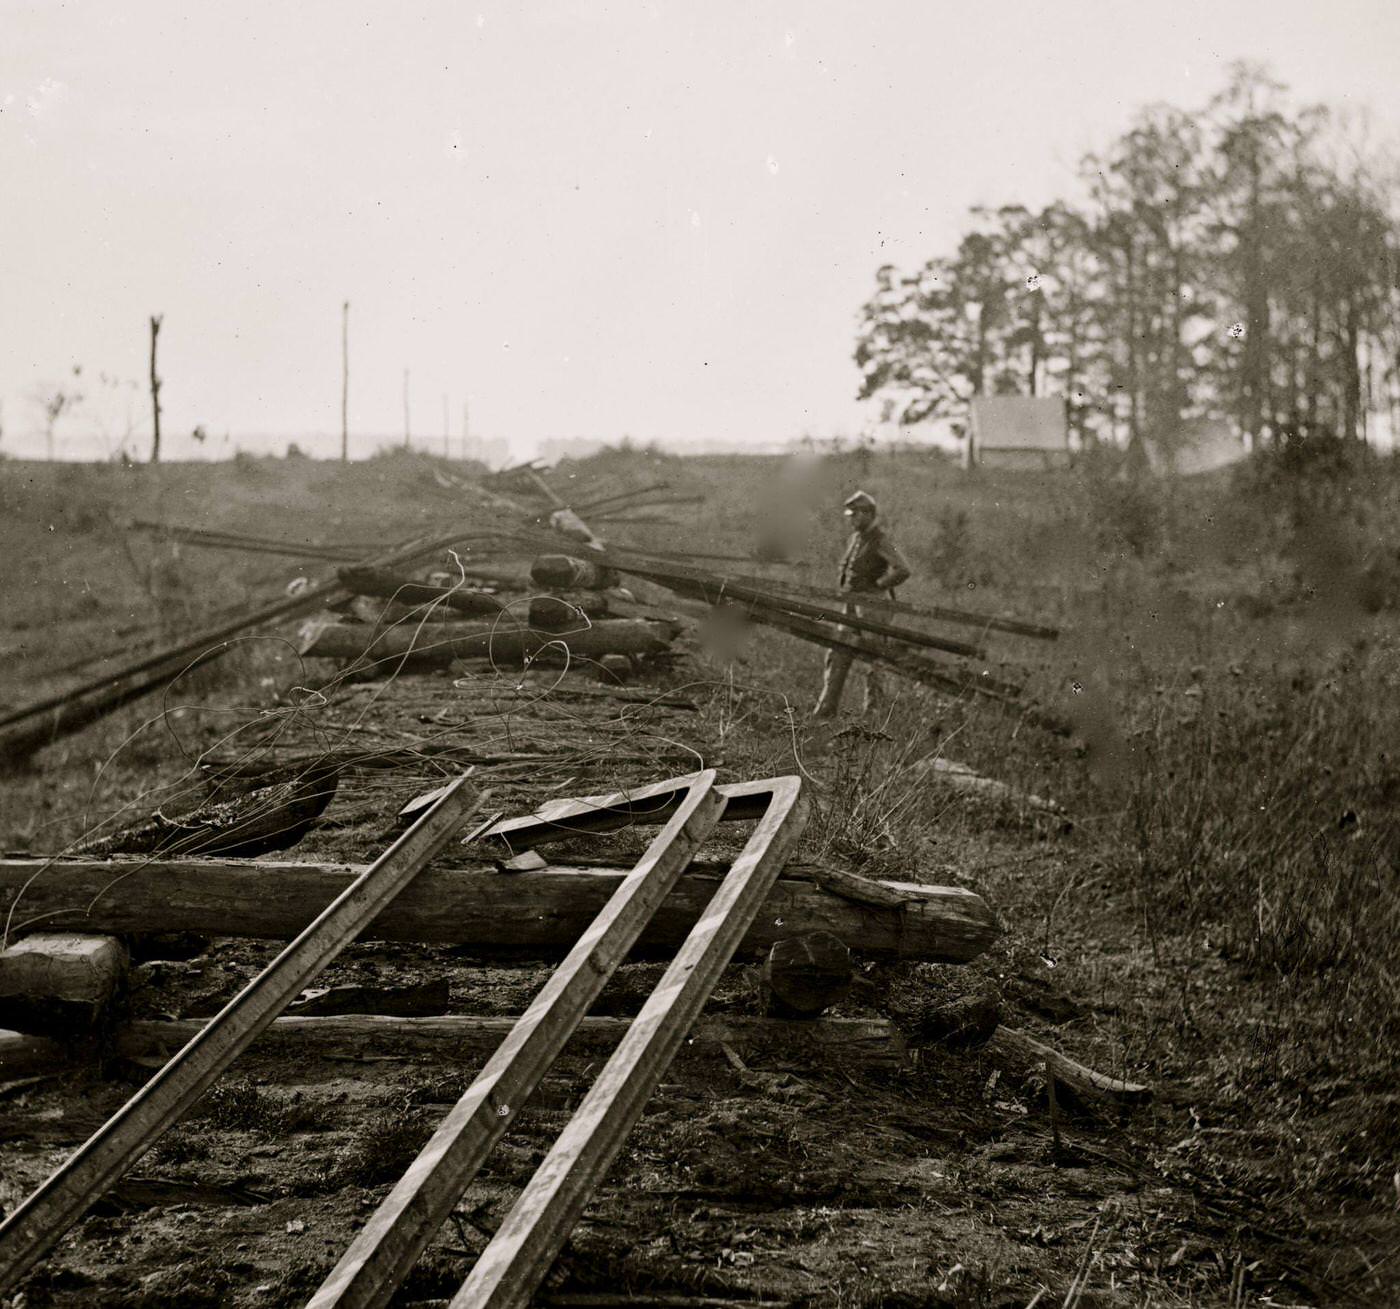 View of the tracks of the Orange & Alexandria Railroad, destroyed by the Confederates between Bristow Station and the Rappahannock, 1862.